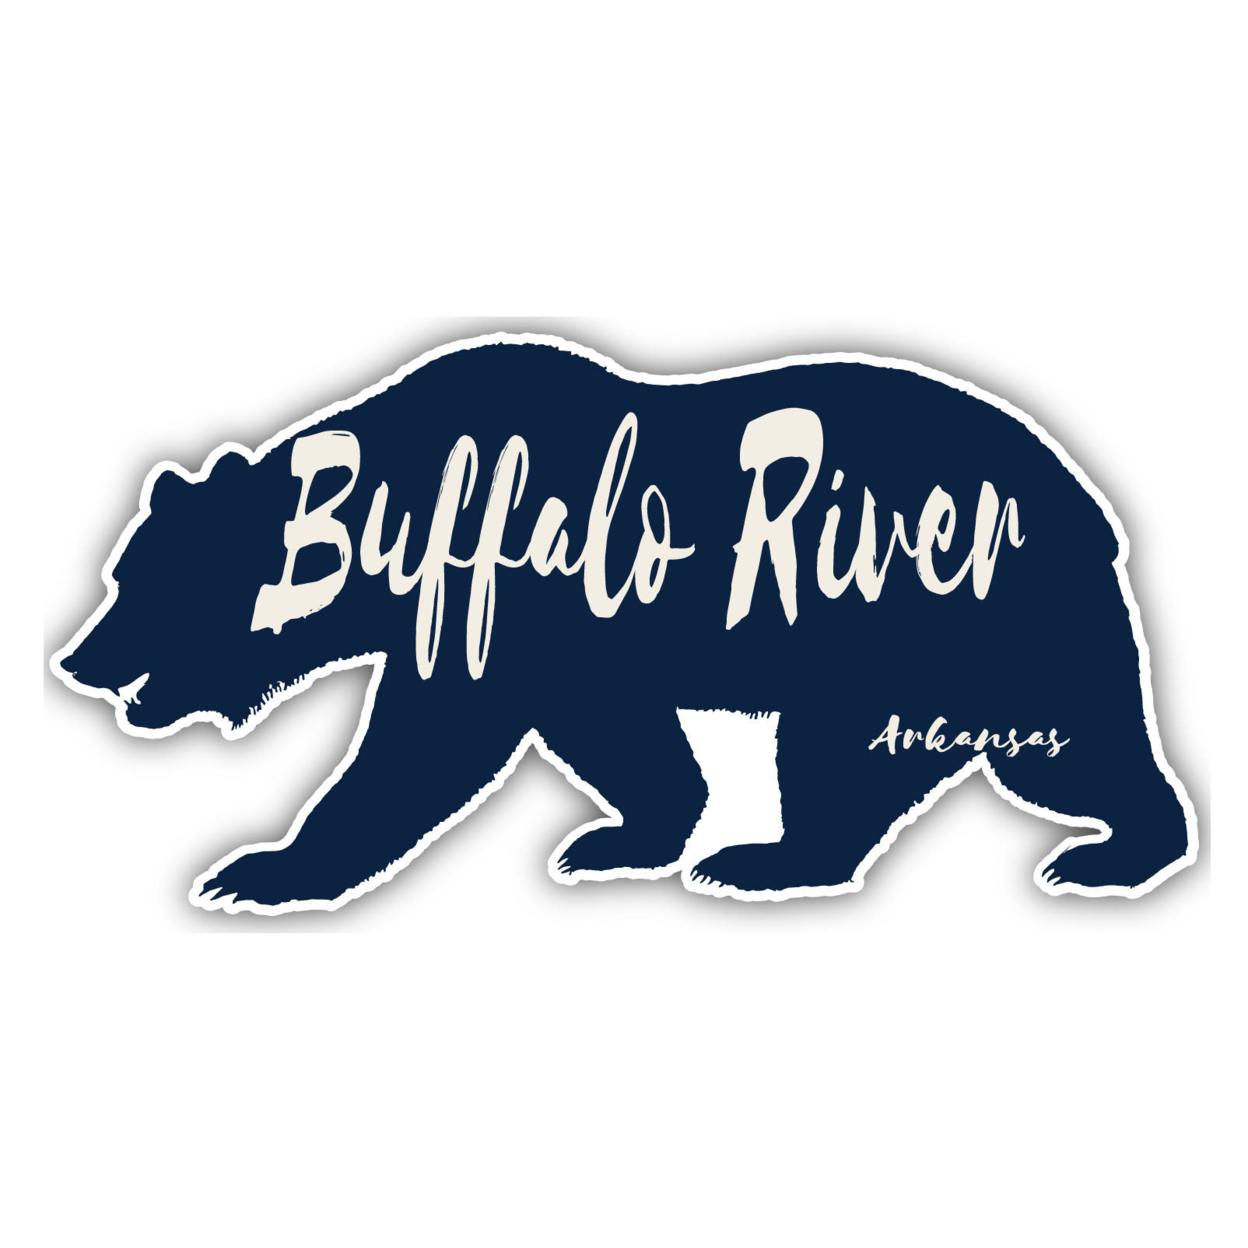 Buffalo River Arkansas Souvenir Decorative Stickers (Choose Theme And Size) - 4-Pack, 6-Inch, Great Outdoors